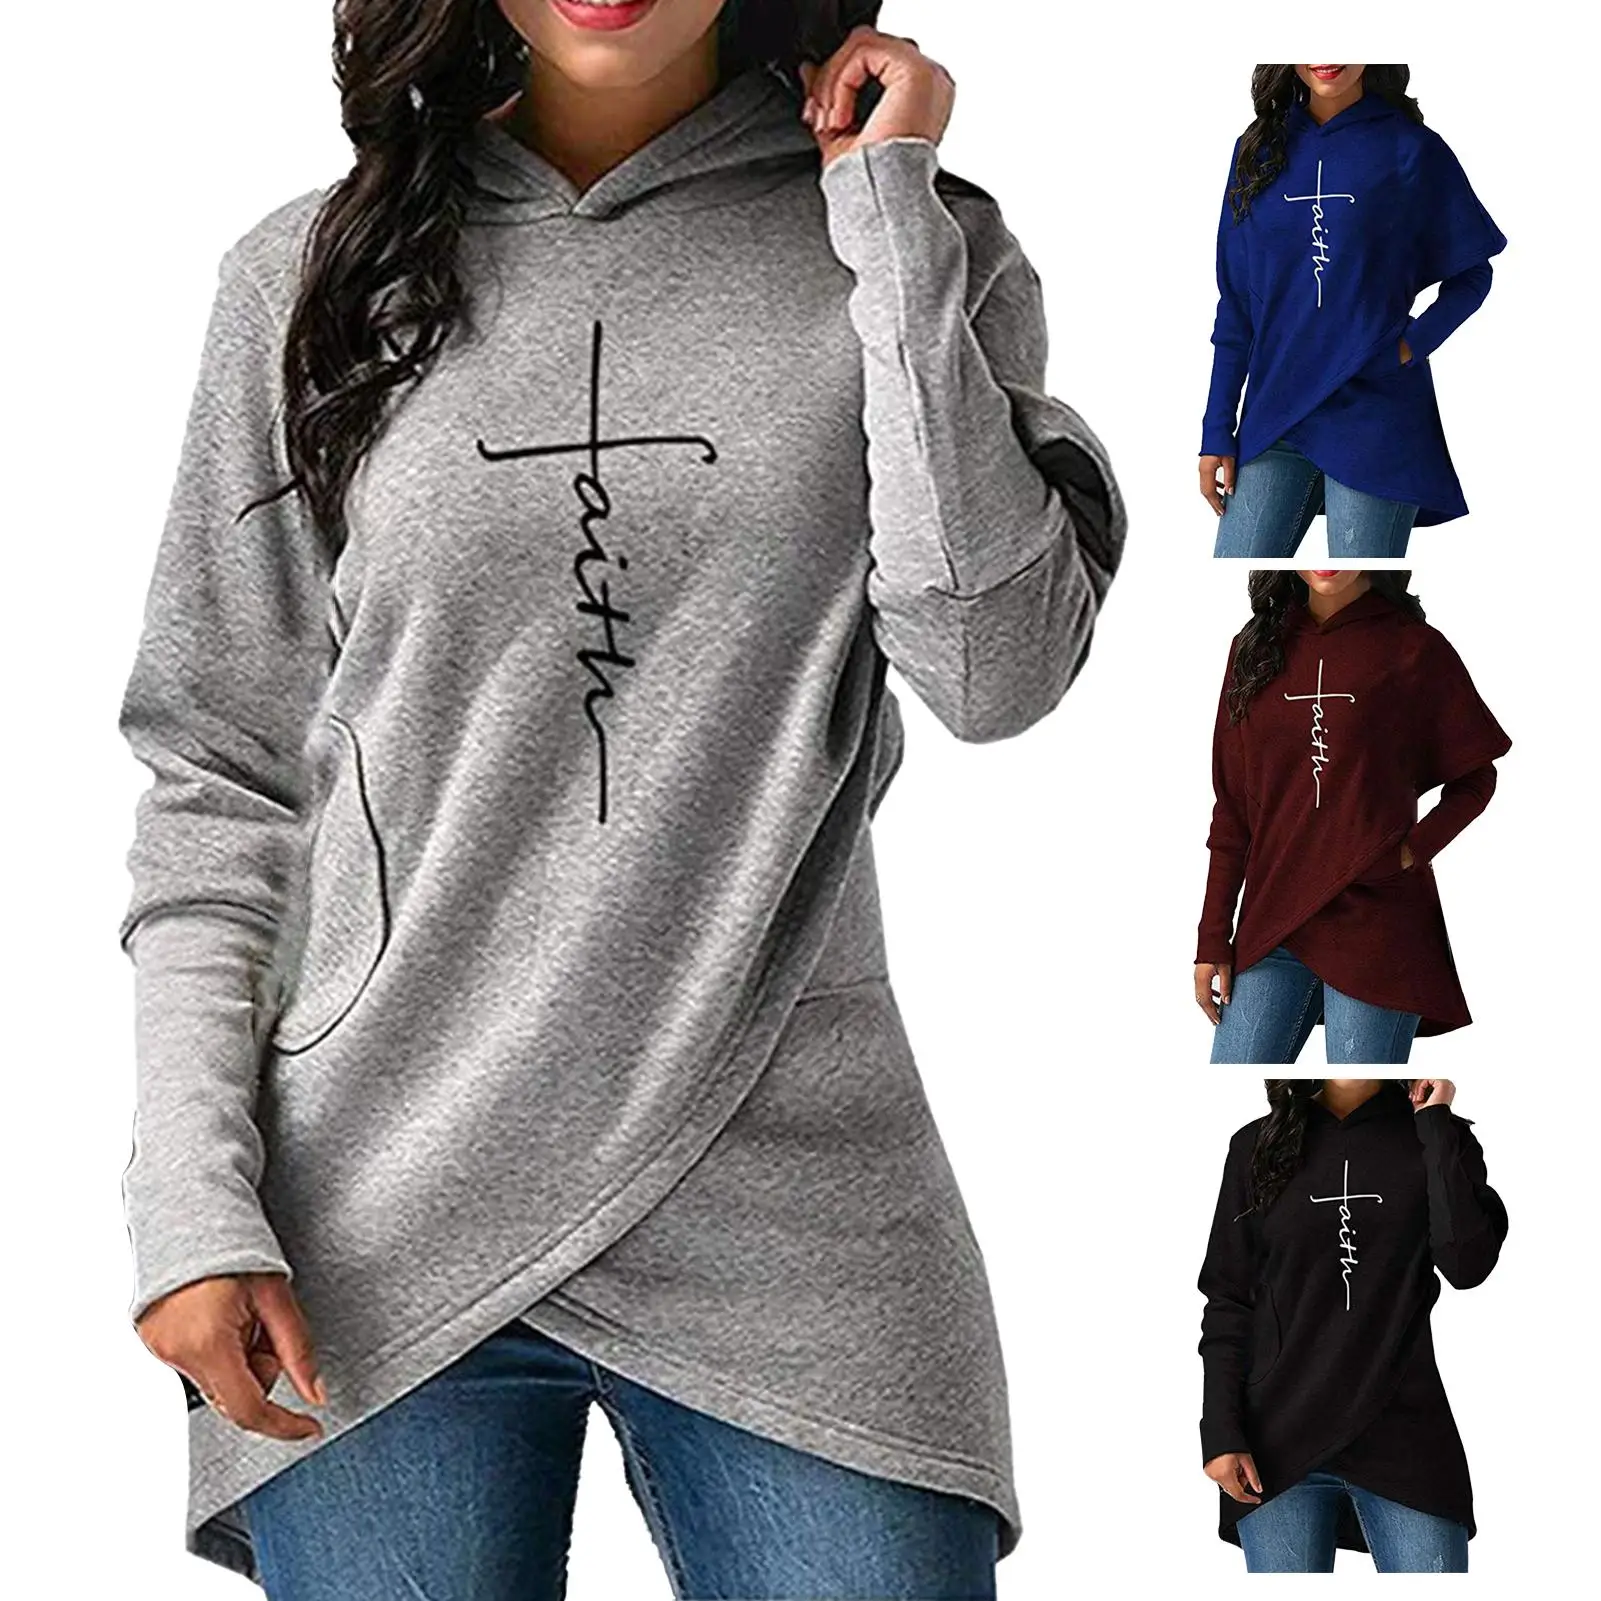 Women's Pullover Sweater Embroidered Pullover Sleeve Style Collar 2022 Fall/Winter Women's Fashion Irregular Hem Hooded Sweater